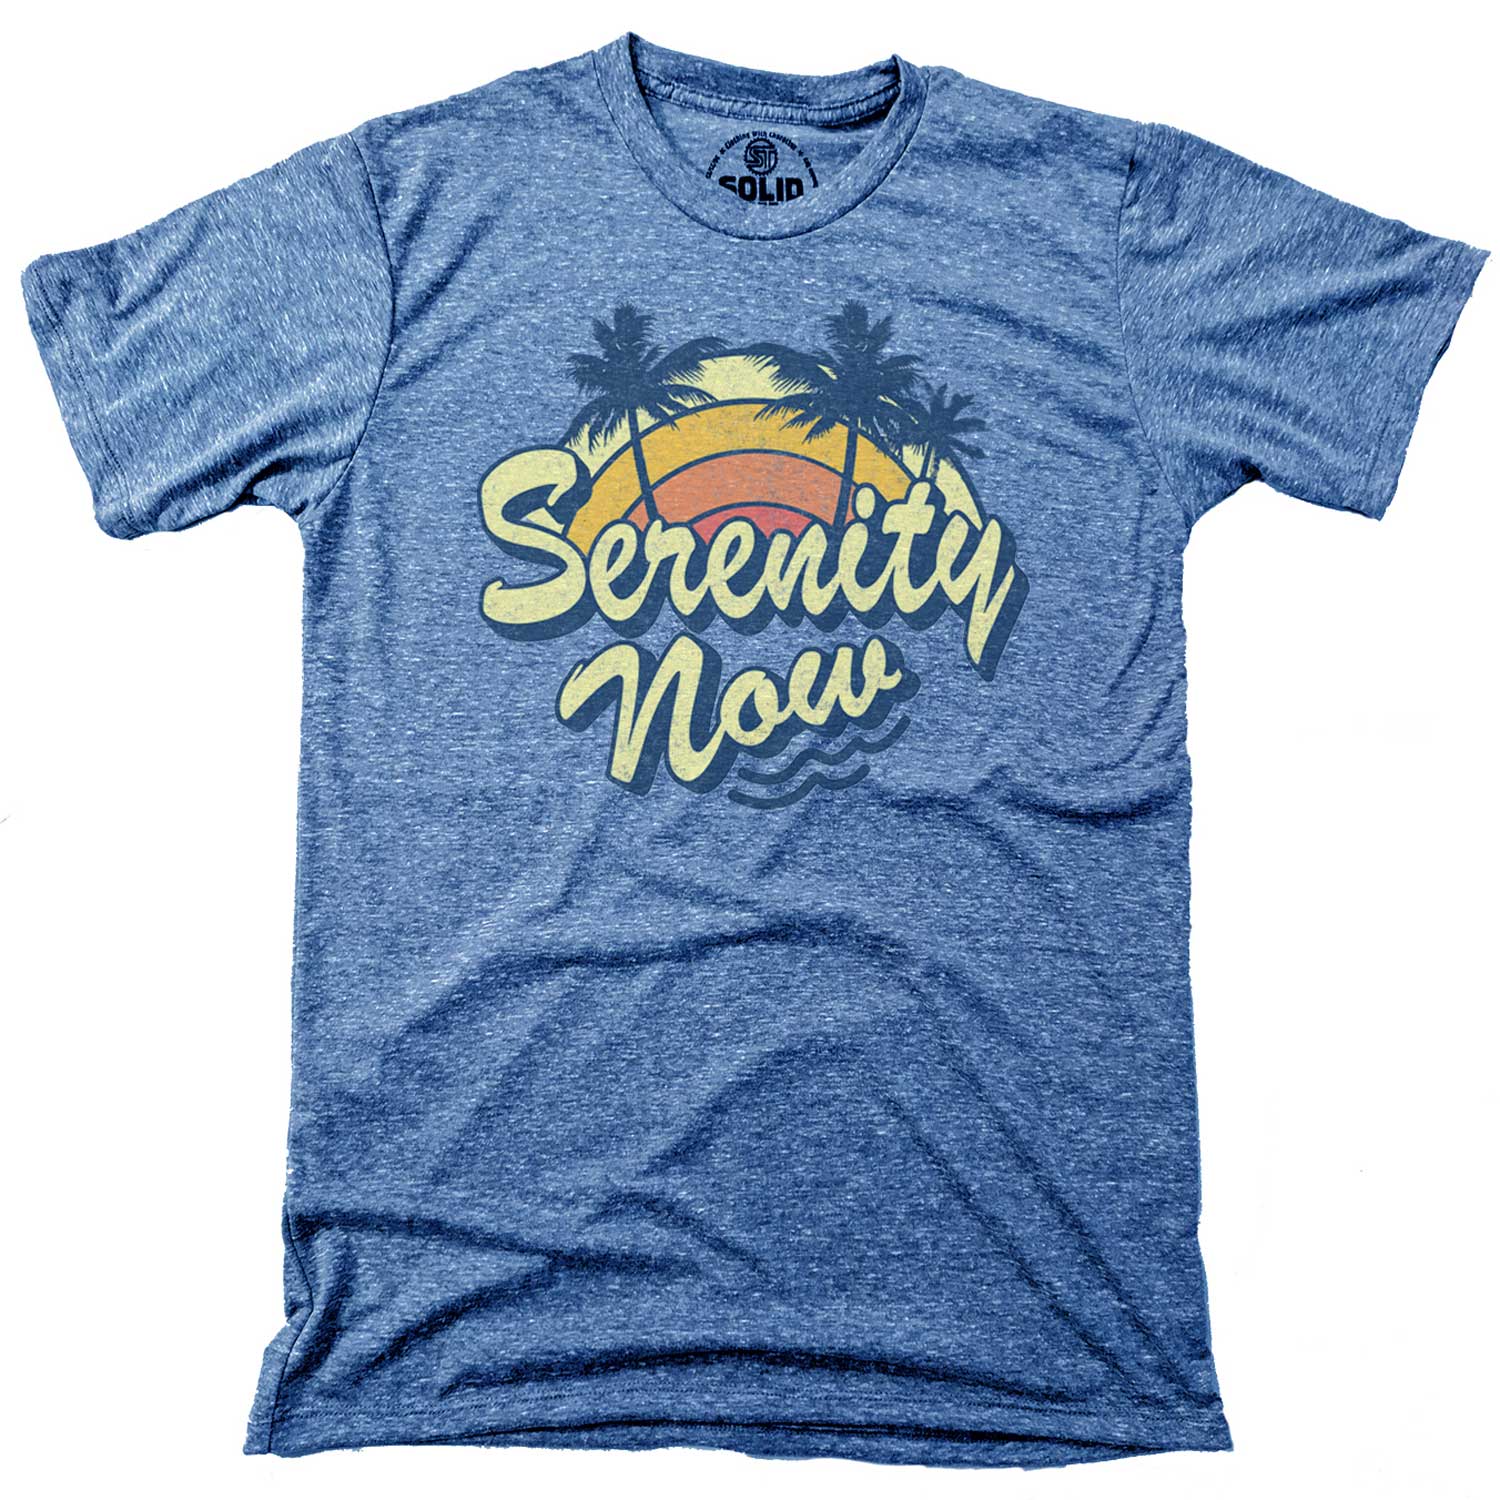 Men's Serenity Now Cool Seinfeld Graphic T-Shirt | Vintage Beach Vacation Tee | Solid Threads